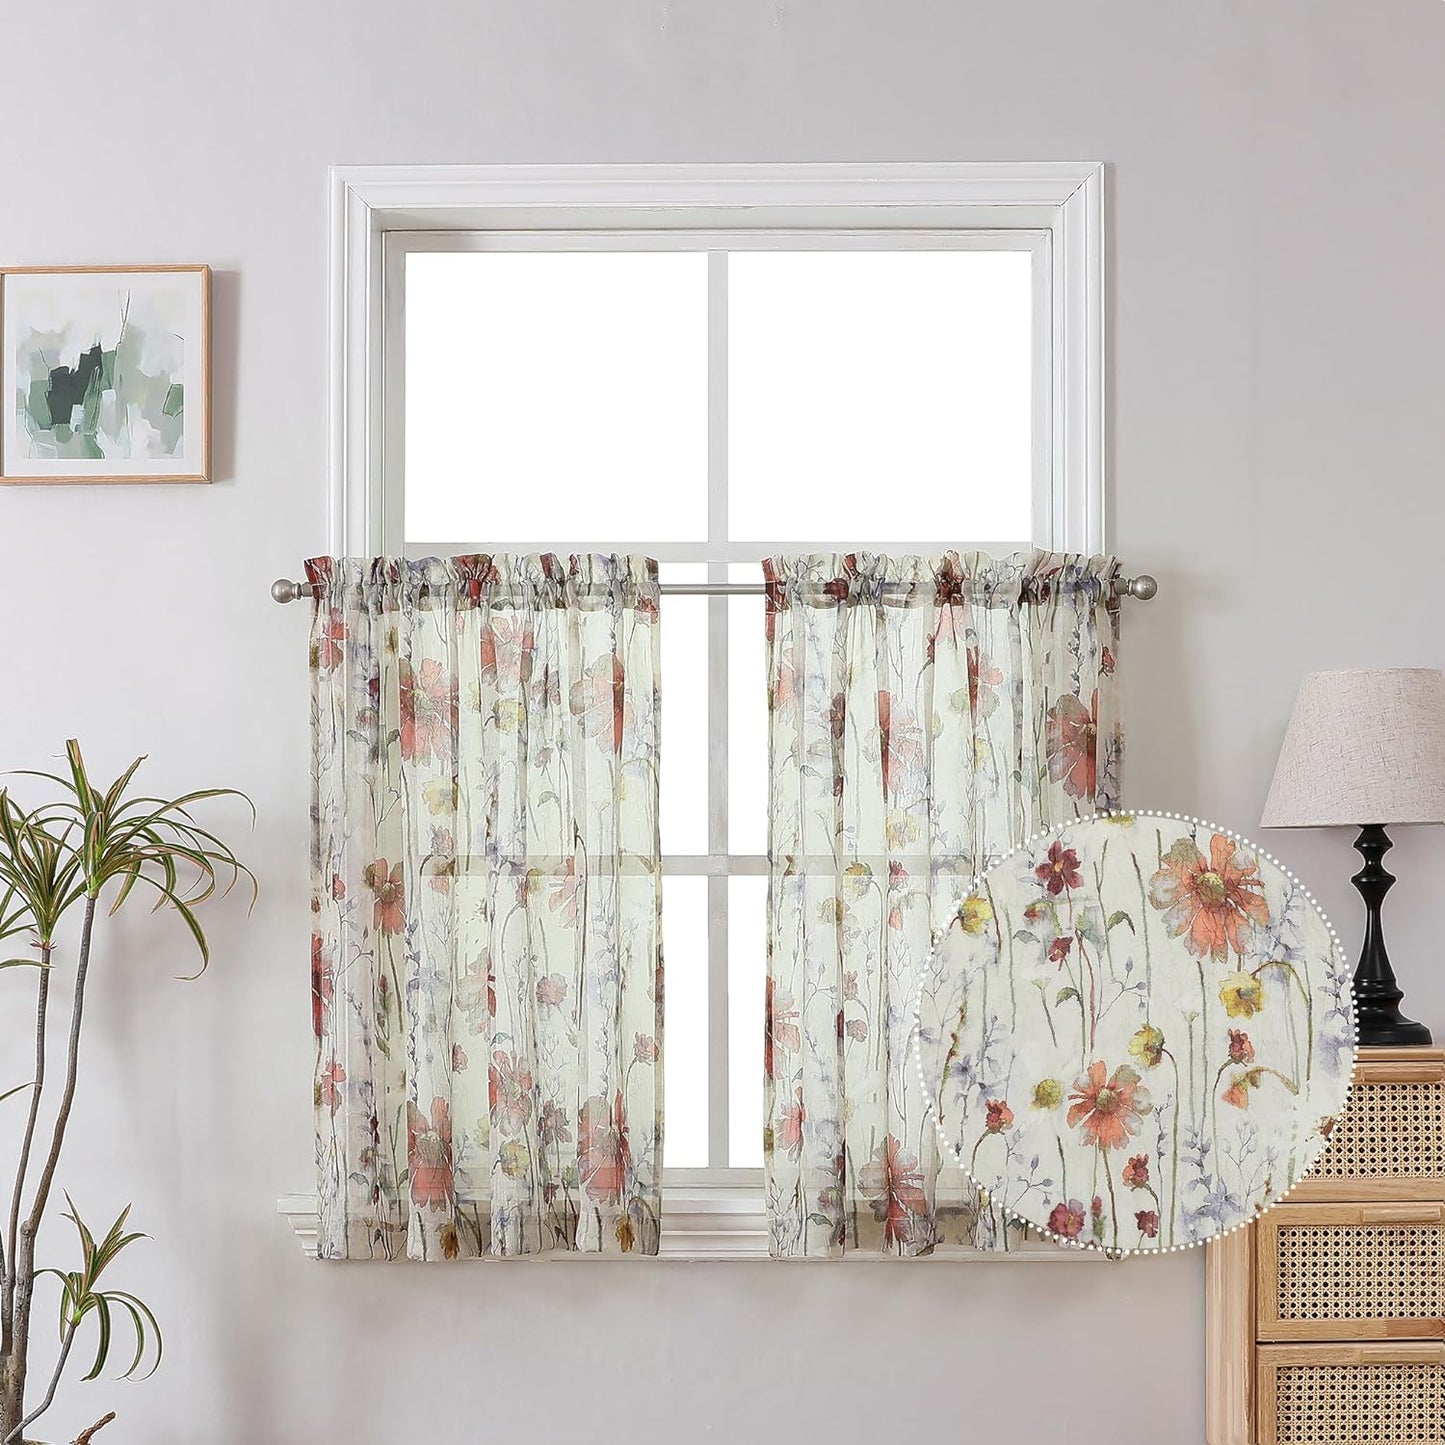 OWENIE Crushed Semi Sheer Curtains 72 Inches Length 2 Panels, Floral Pattern Design Rod Pocket Light Filtering Farmhouse Curtains for Bedroom Living Room, 2 Pieces Total 84 Inch Wide, 72 Inch Long  OWENIE Multi Color 42"Wx36"L | 2Pcs 